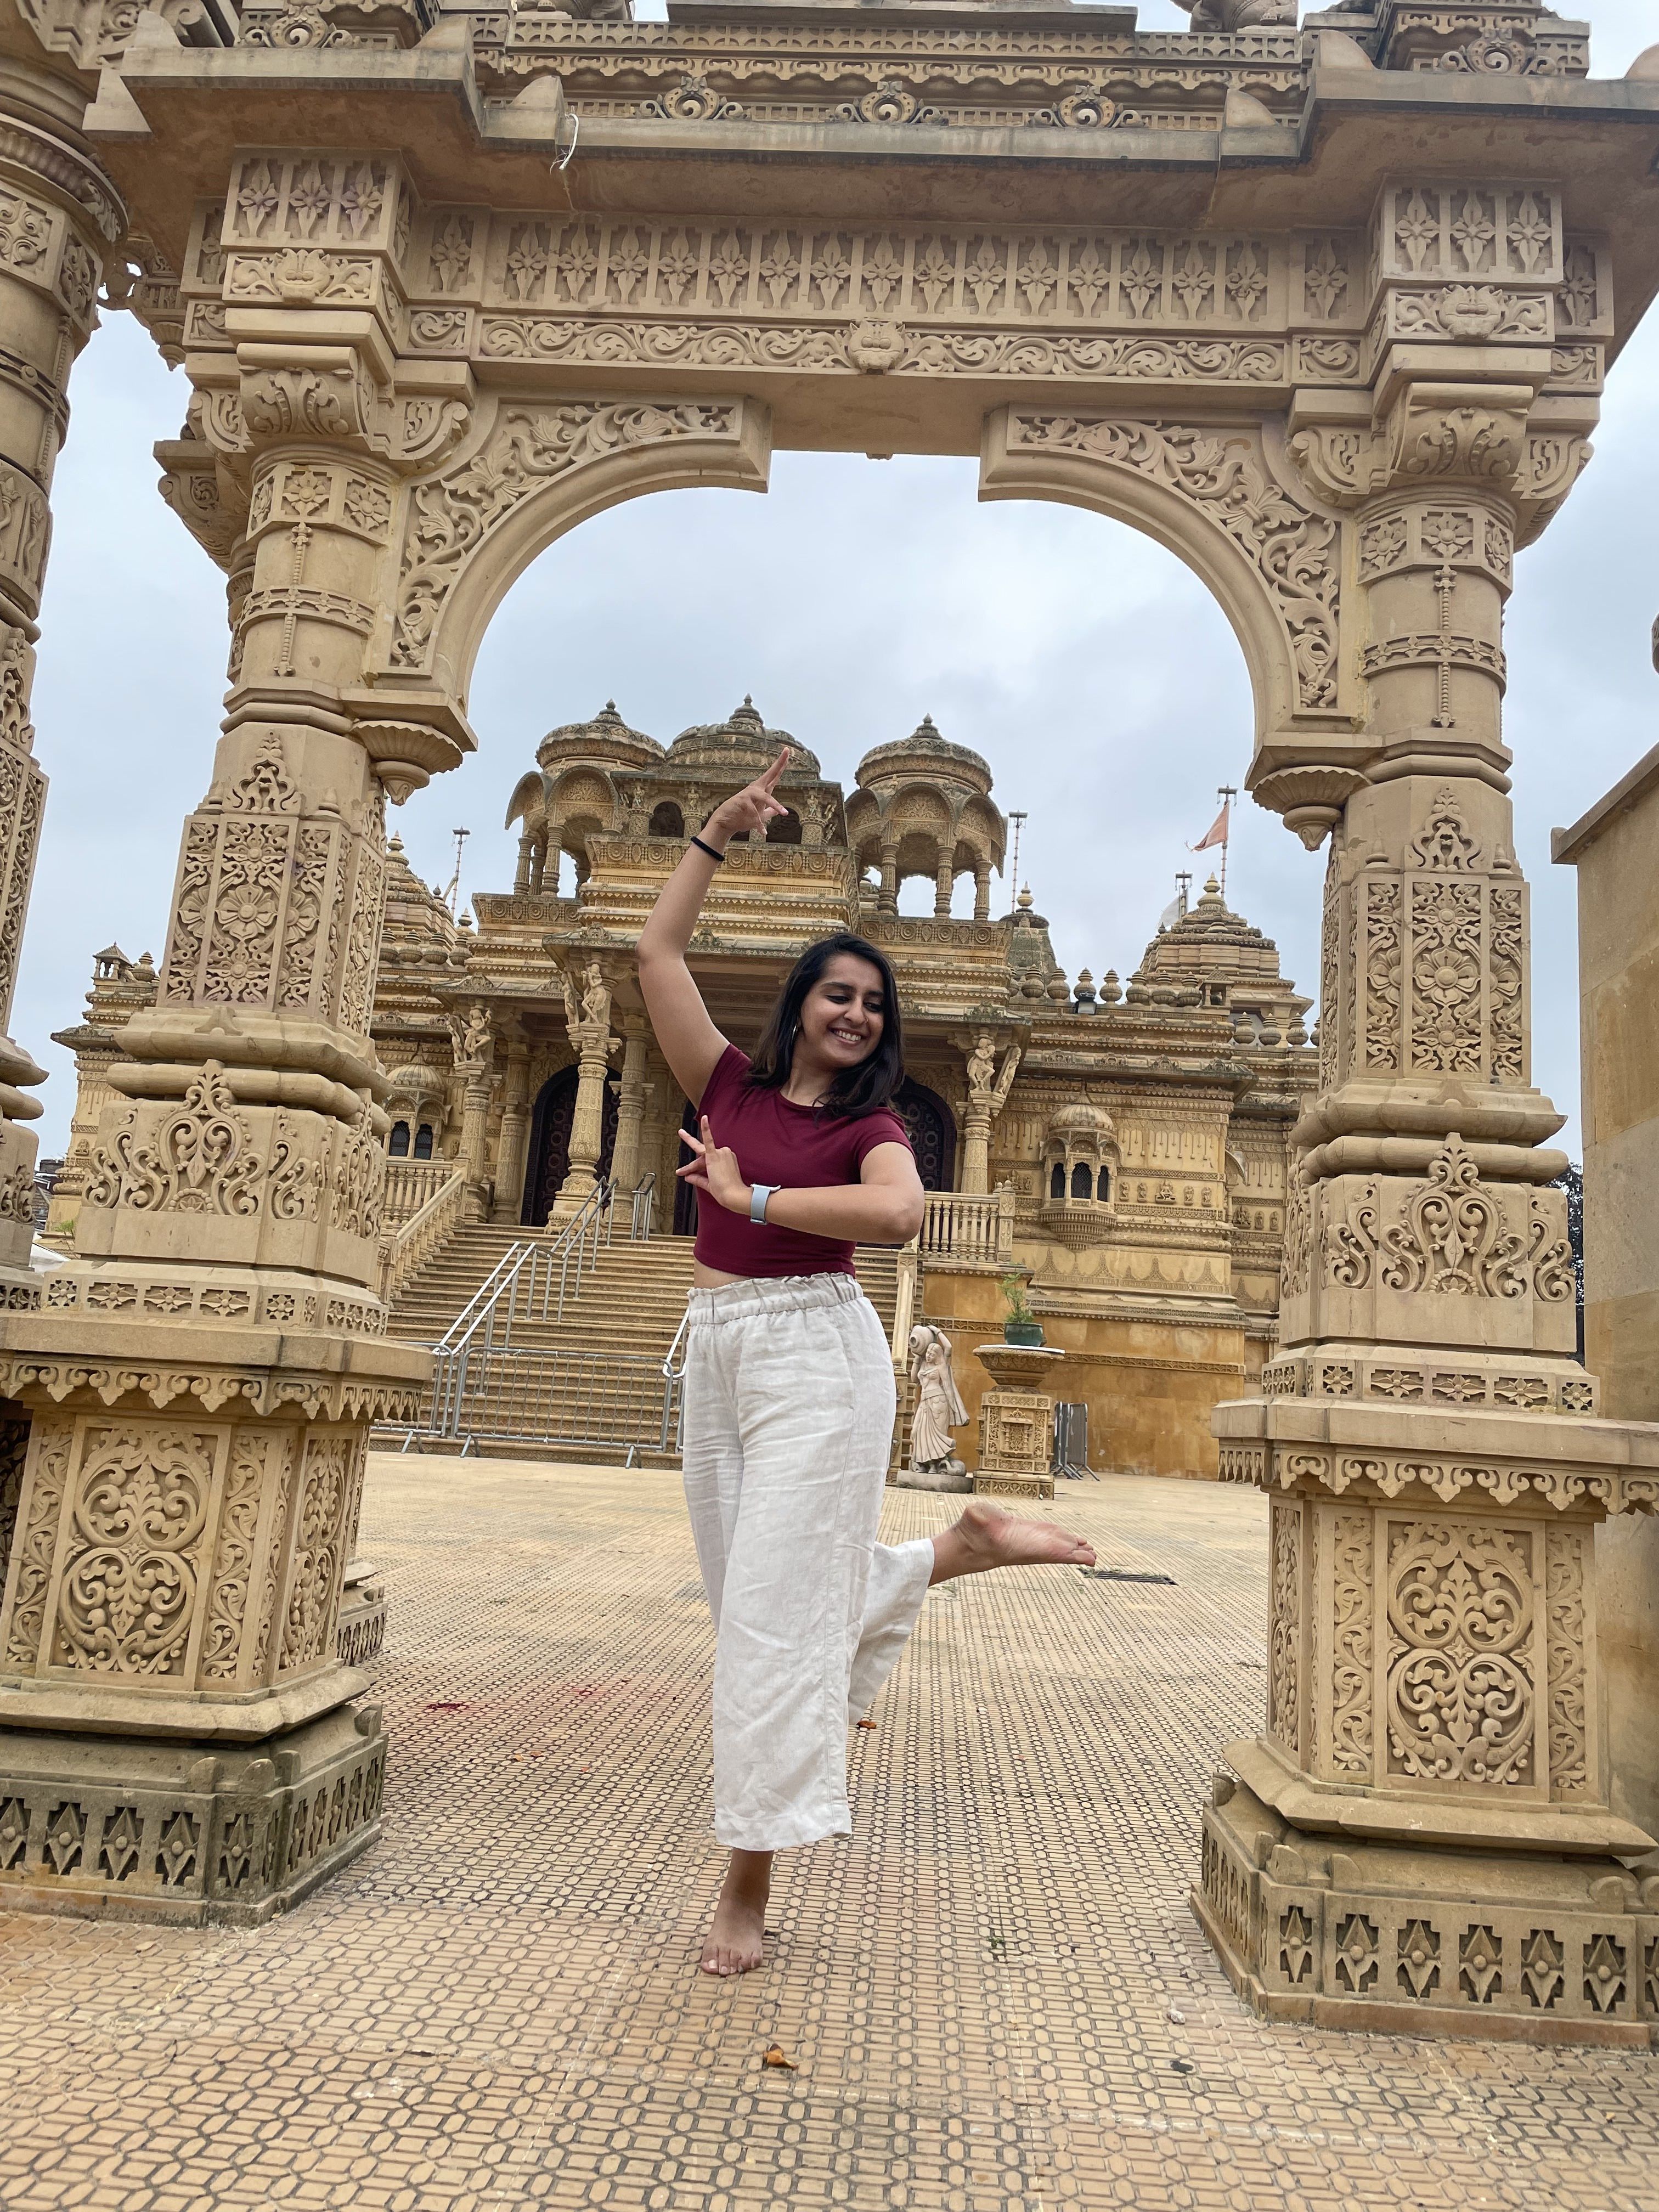 Yashodhra is wearing white trousers and a burgundy t-shirt. She strikes a traditional Indian dance pose in front of the Hindu Temple in Wembley, London.